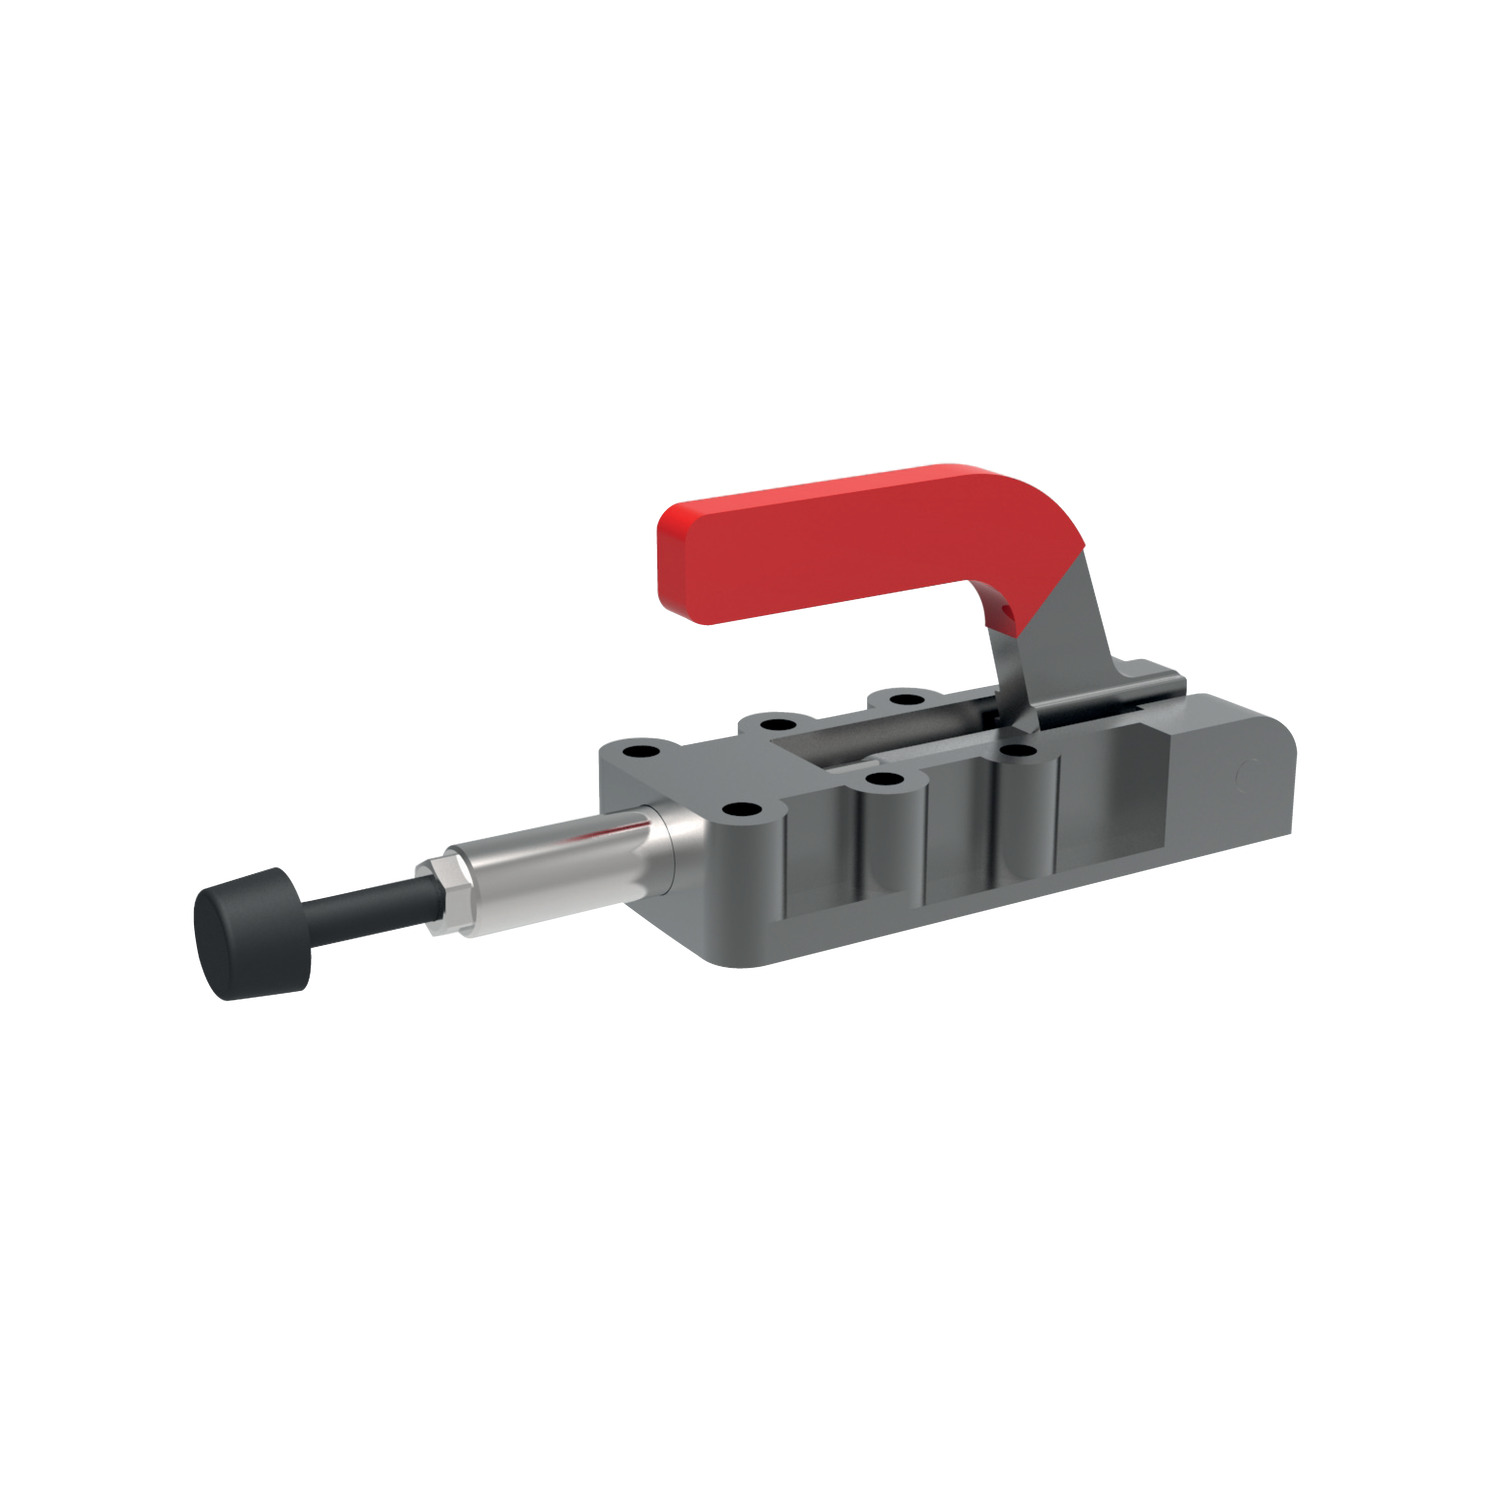 Heavy Duty Push-Pull Type Toggle Clamps  Heavy duty push pull toggle clamps have a very strong construction with long push-rod guidance. Reversible lever version available.